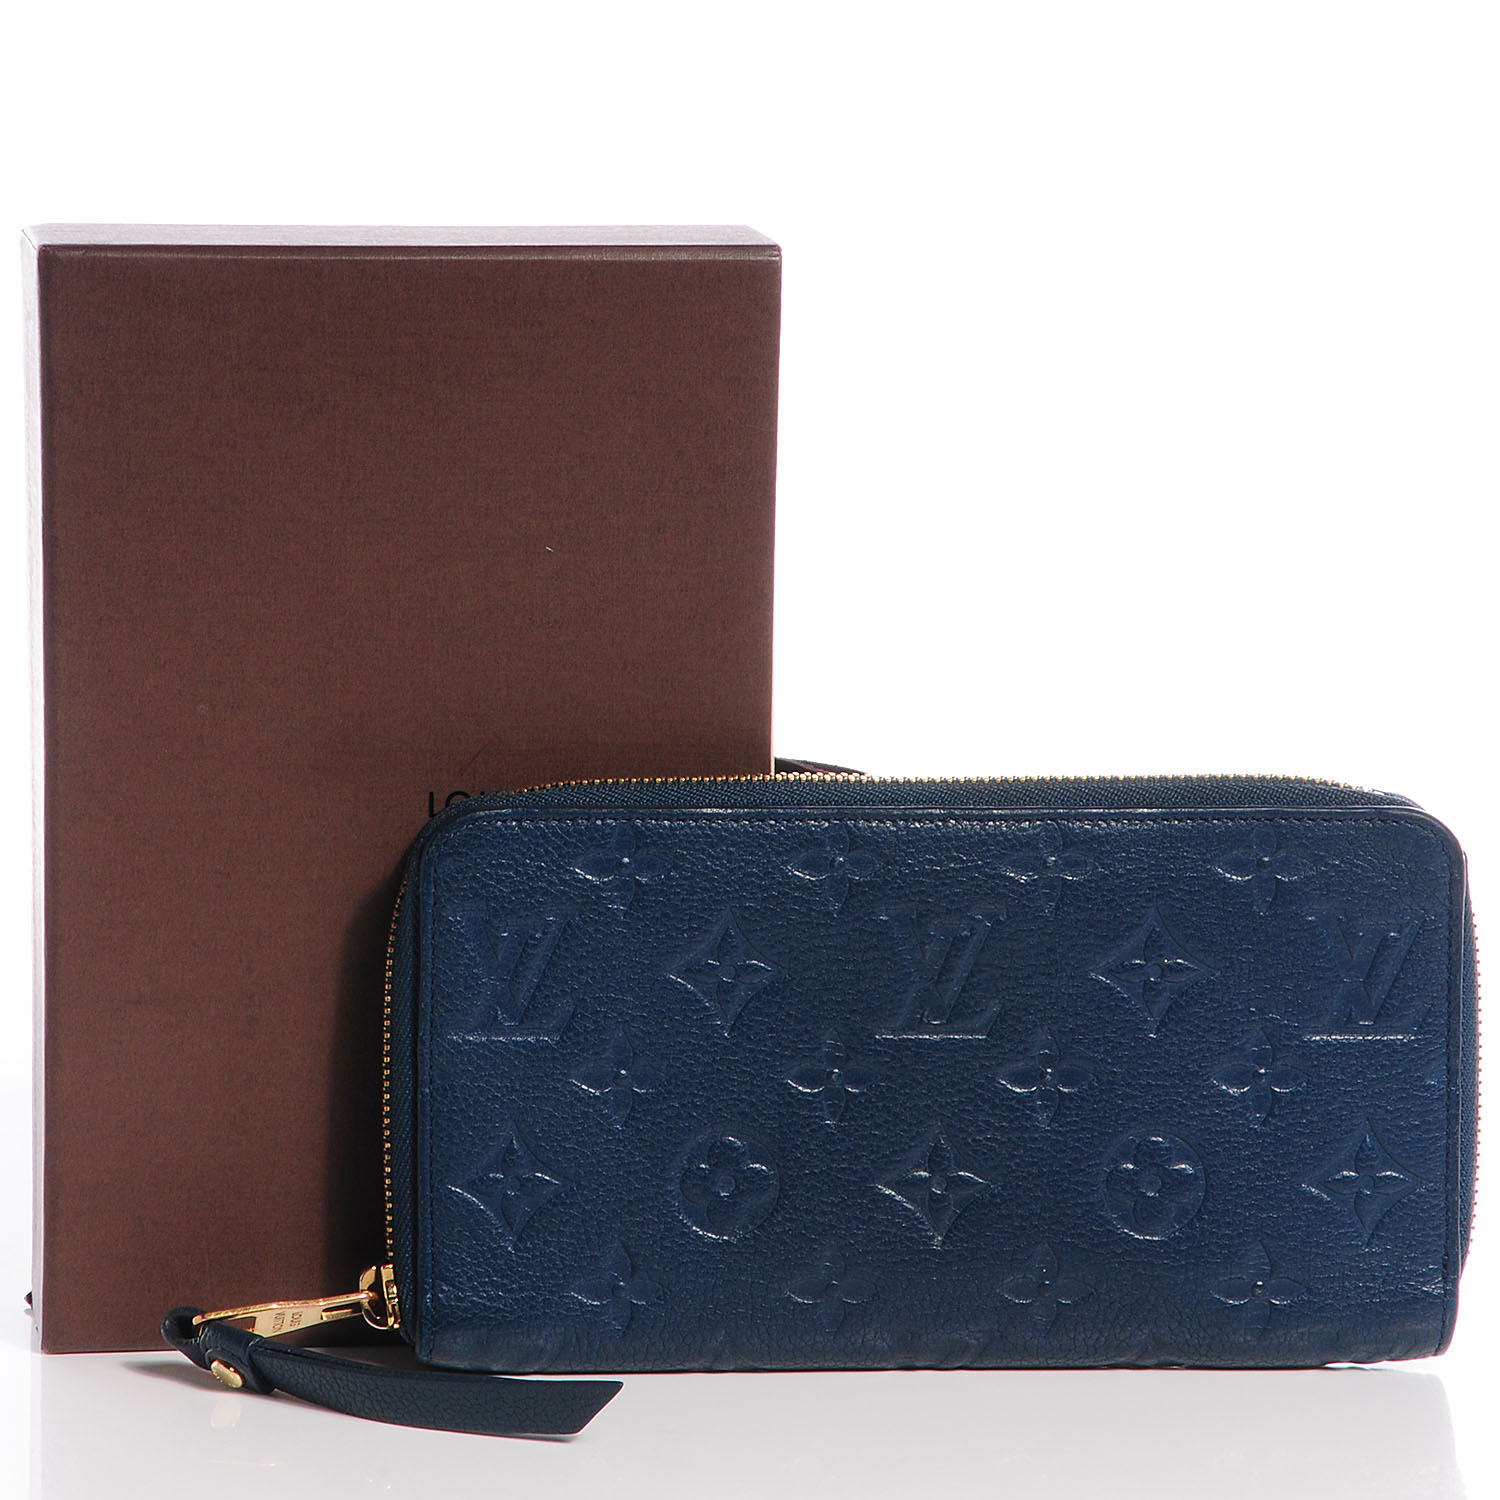 Lv Zippy Wallet Dupe!  Natural Resource Department